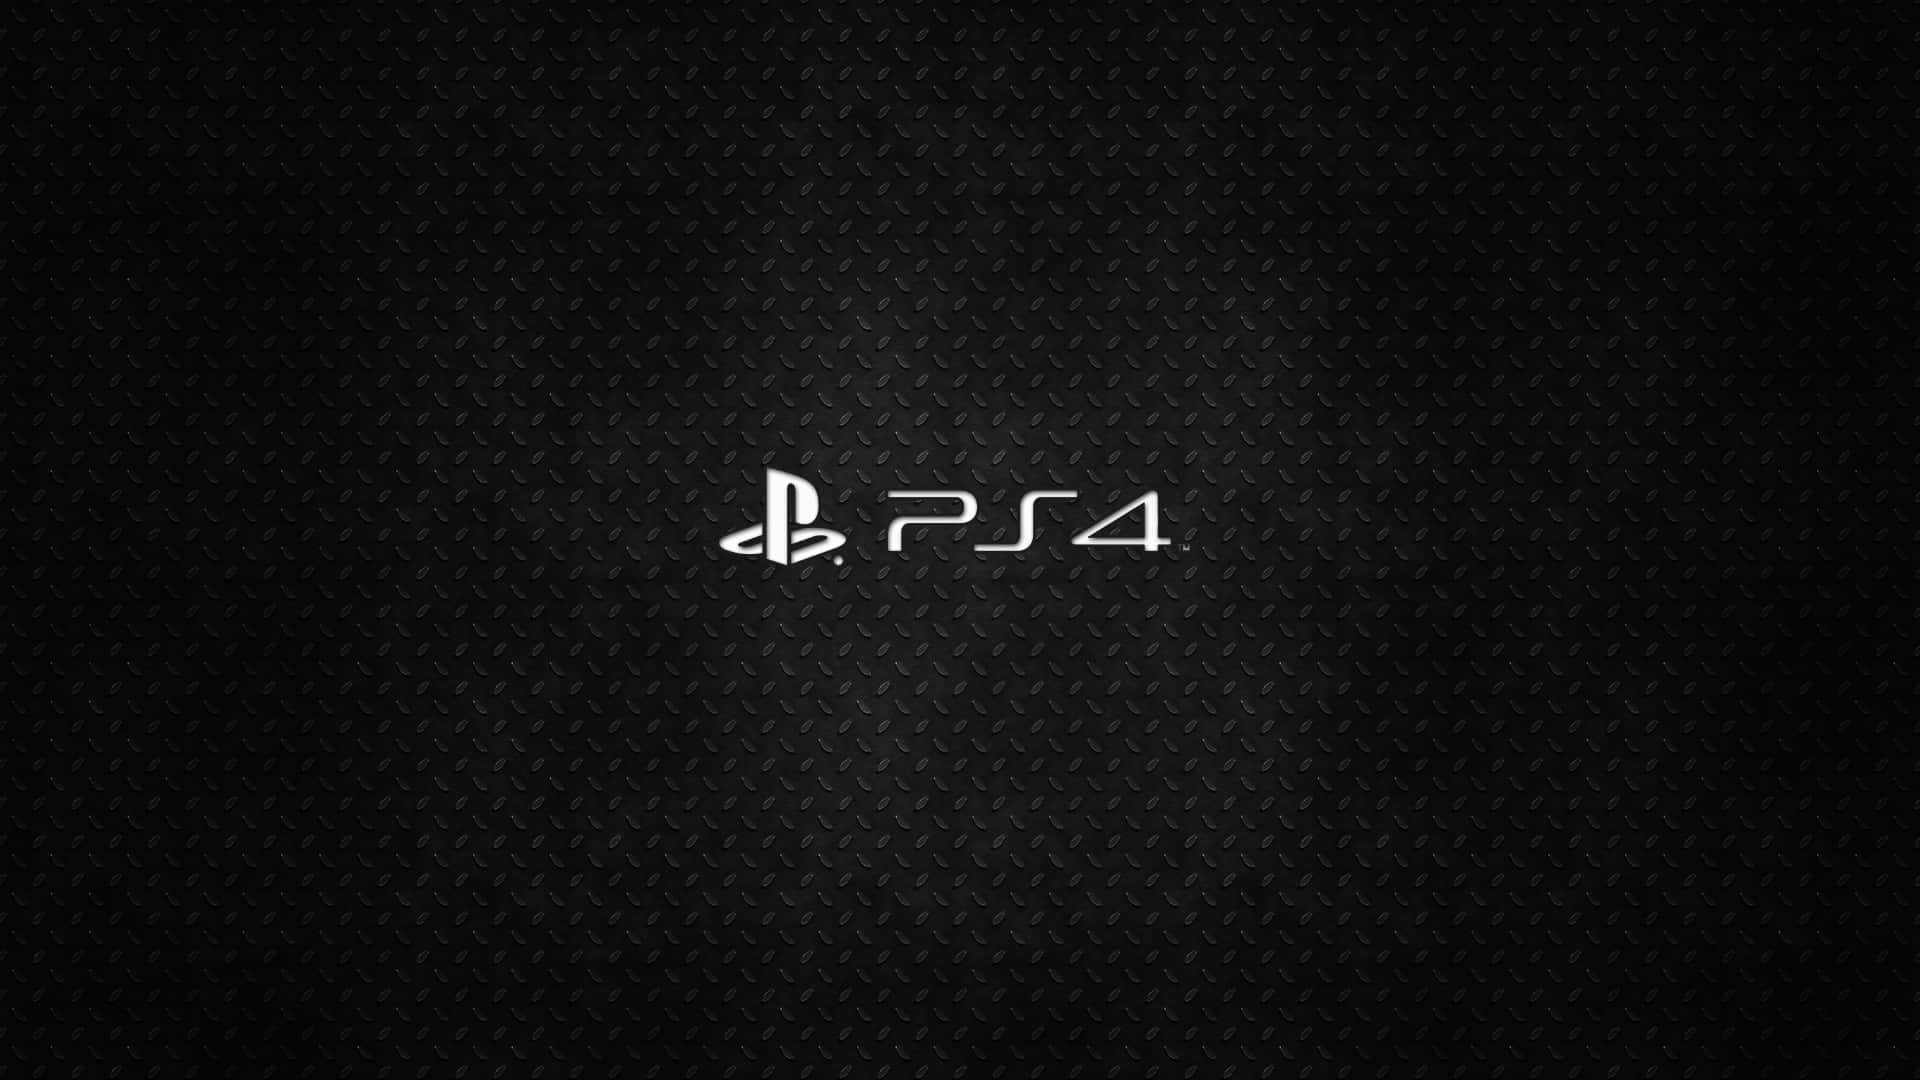 Simple Cool Ps4 With Large Logo In White In The Middle Background